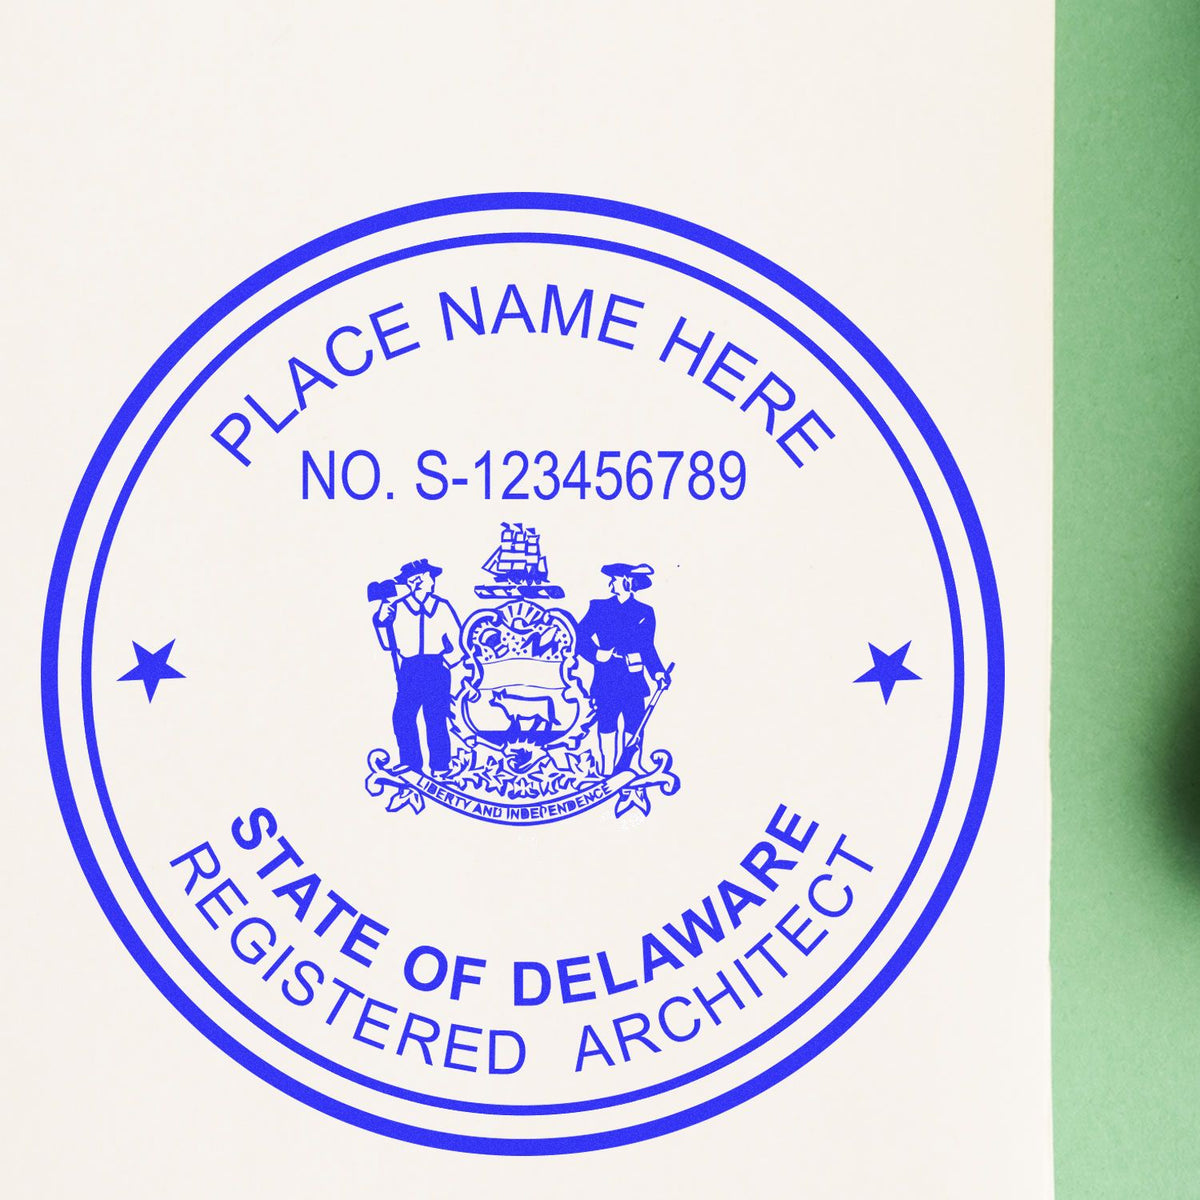 Slim Pre-Inked Delaware Architect Seal Stamp in use photo showing a stamped imprint of the Slim Pre-Inked Delaware Architect Seal Stamp